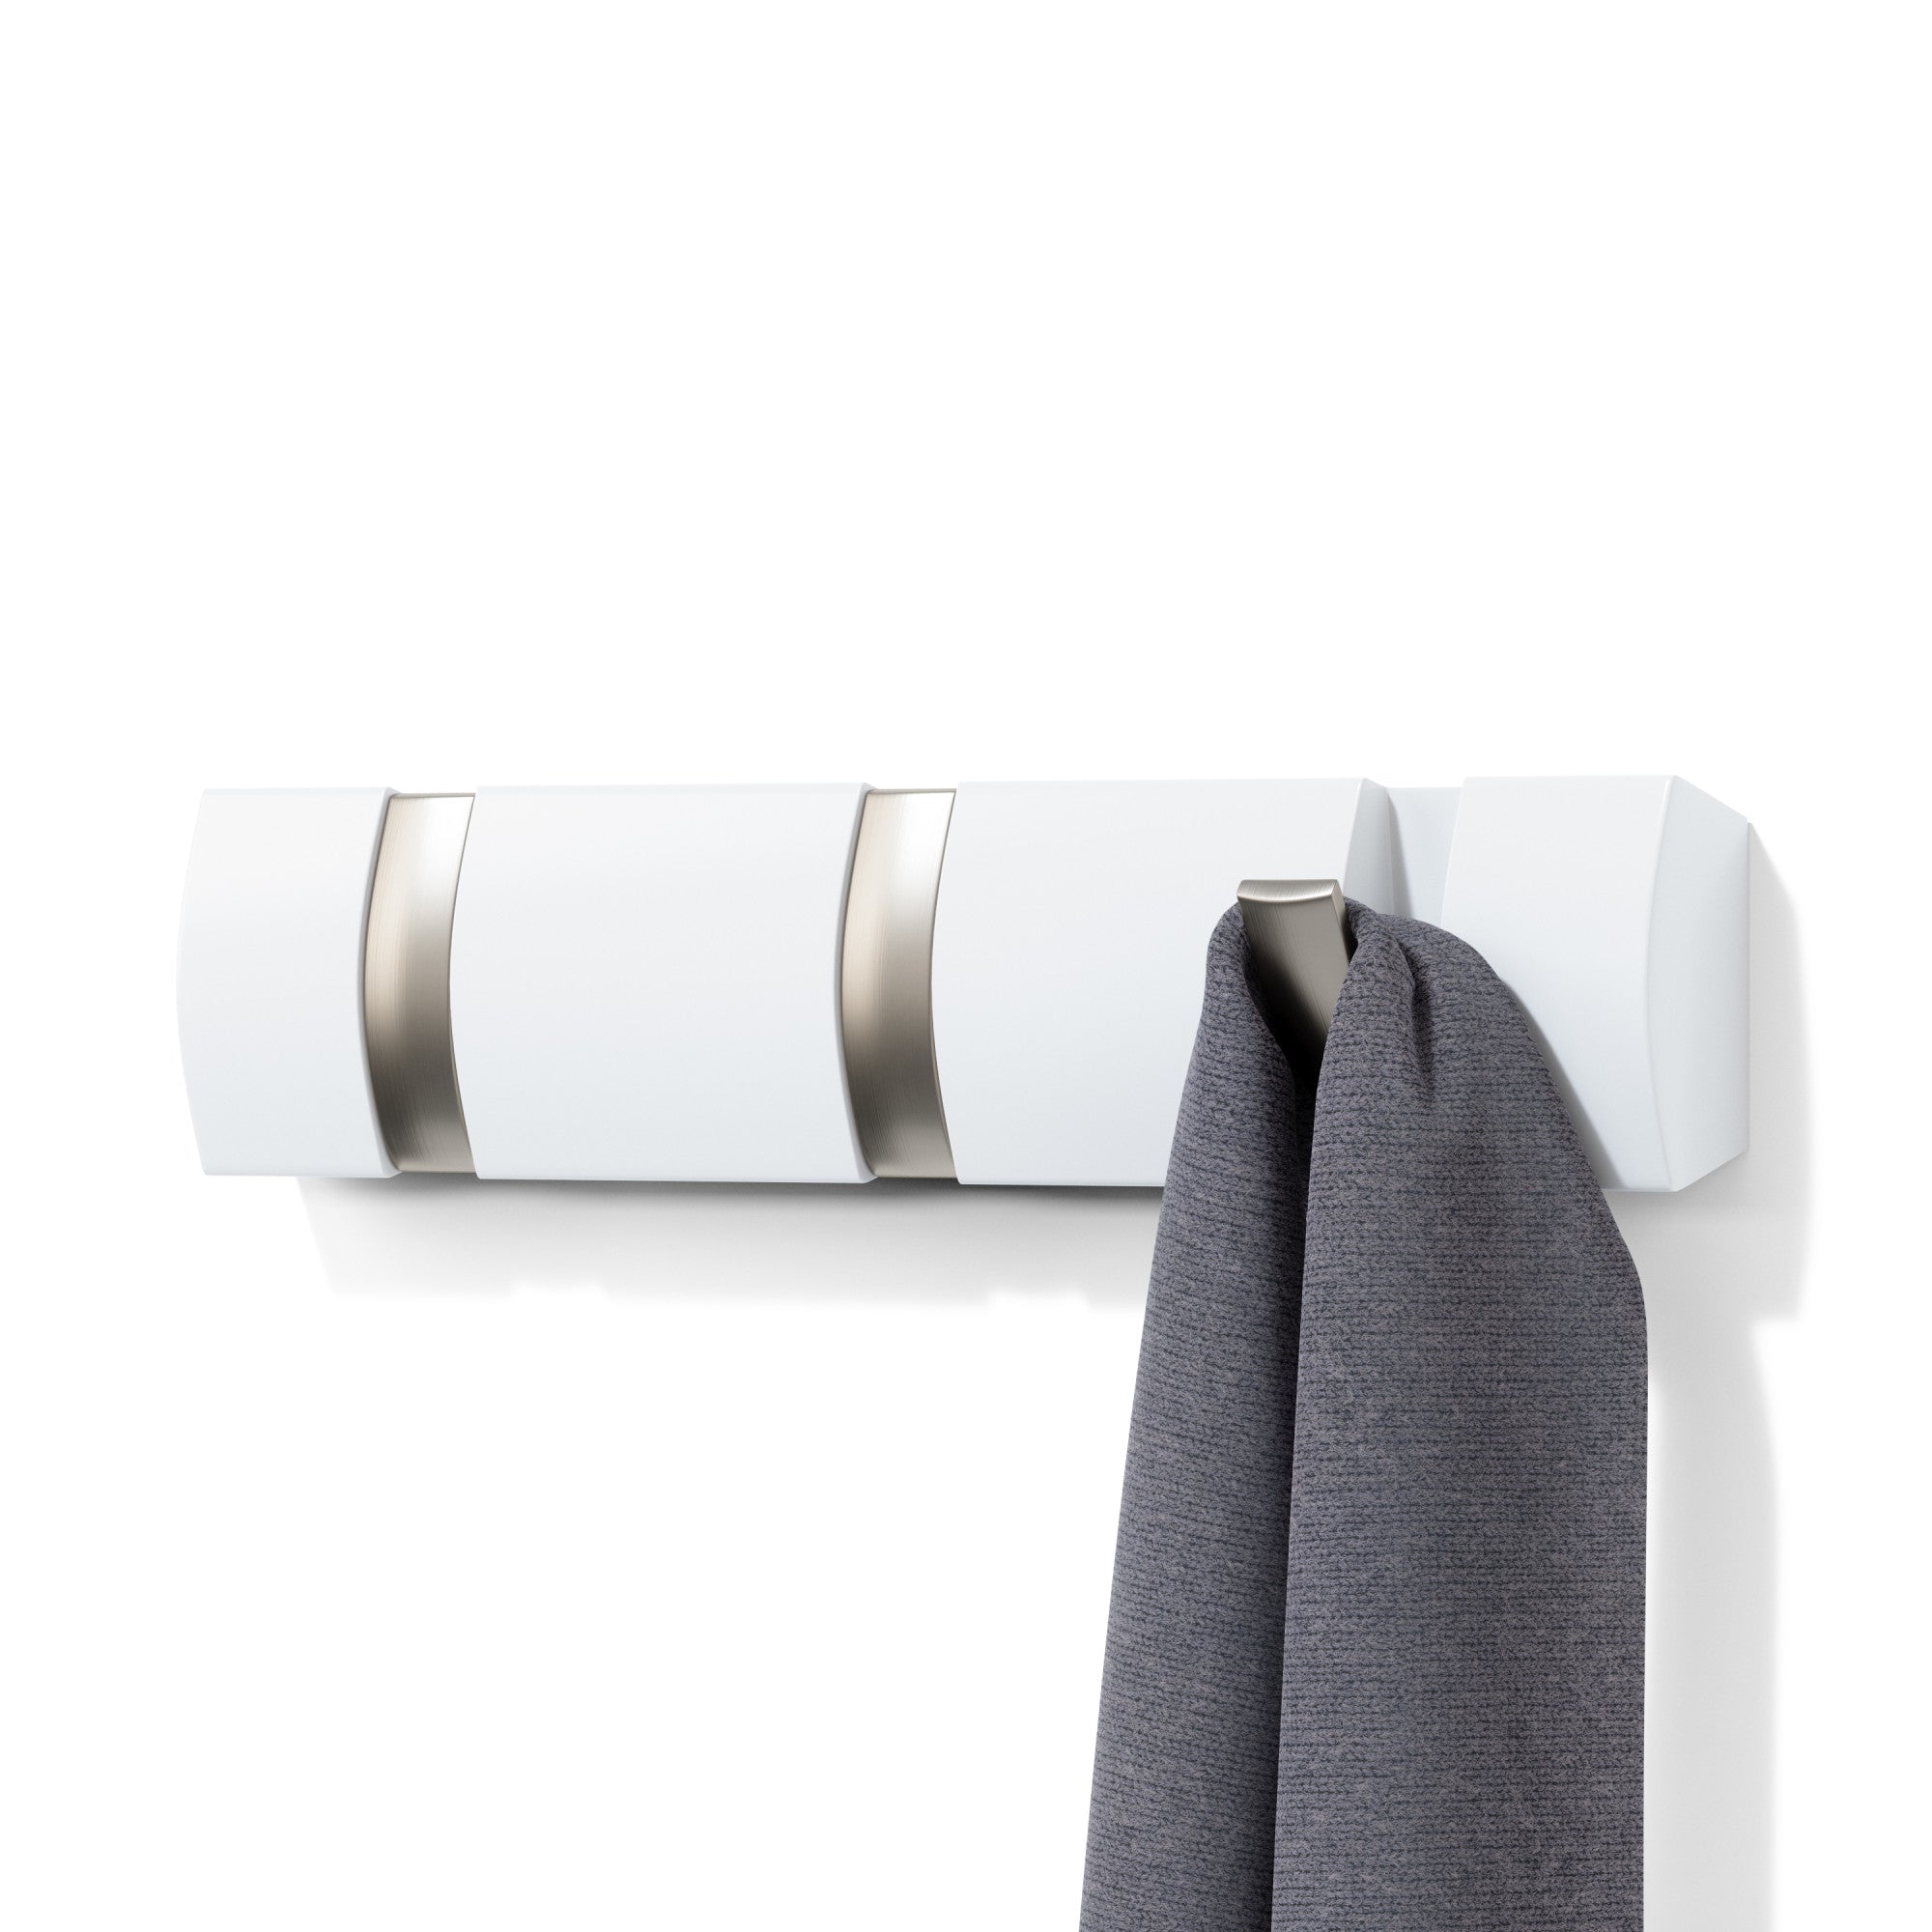 Flip 3 Wall Mounted Coat Rack | Hanging Space When You Need It